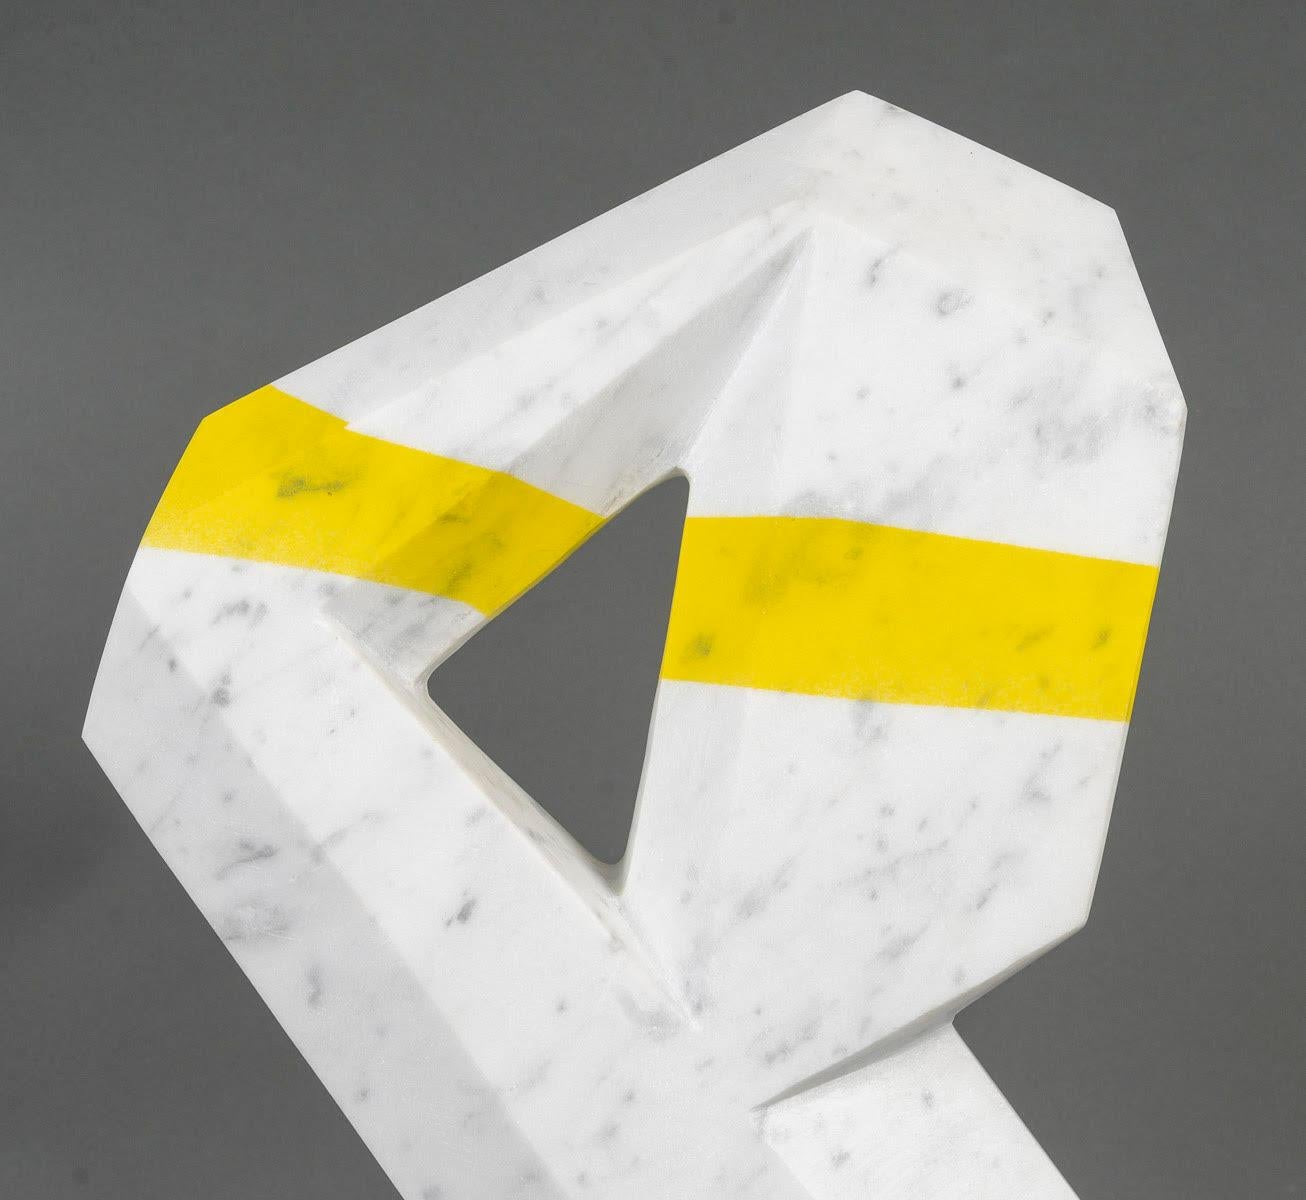 Carrara marble sculpture by François Fernandez, known as SAVY, signed and dated 2001.

Sculpture in Carrara marble and yellow lacquer by the sculptor François Fernandez, known as SAVY, signed Savy and dated 2001.
H: 48cm (excluding base), W: 24cm,